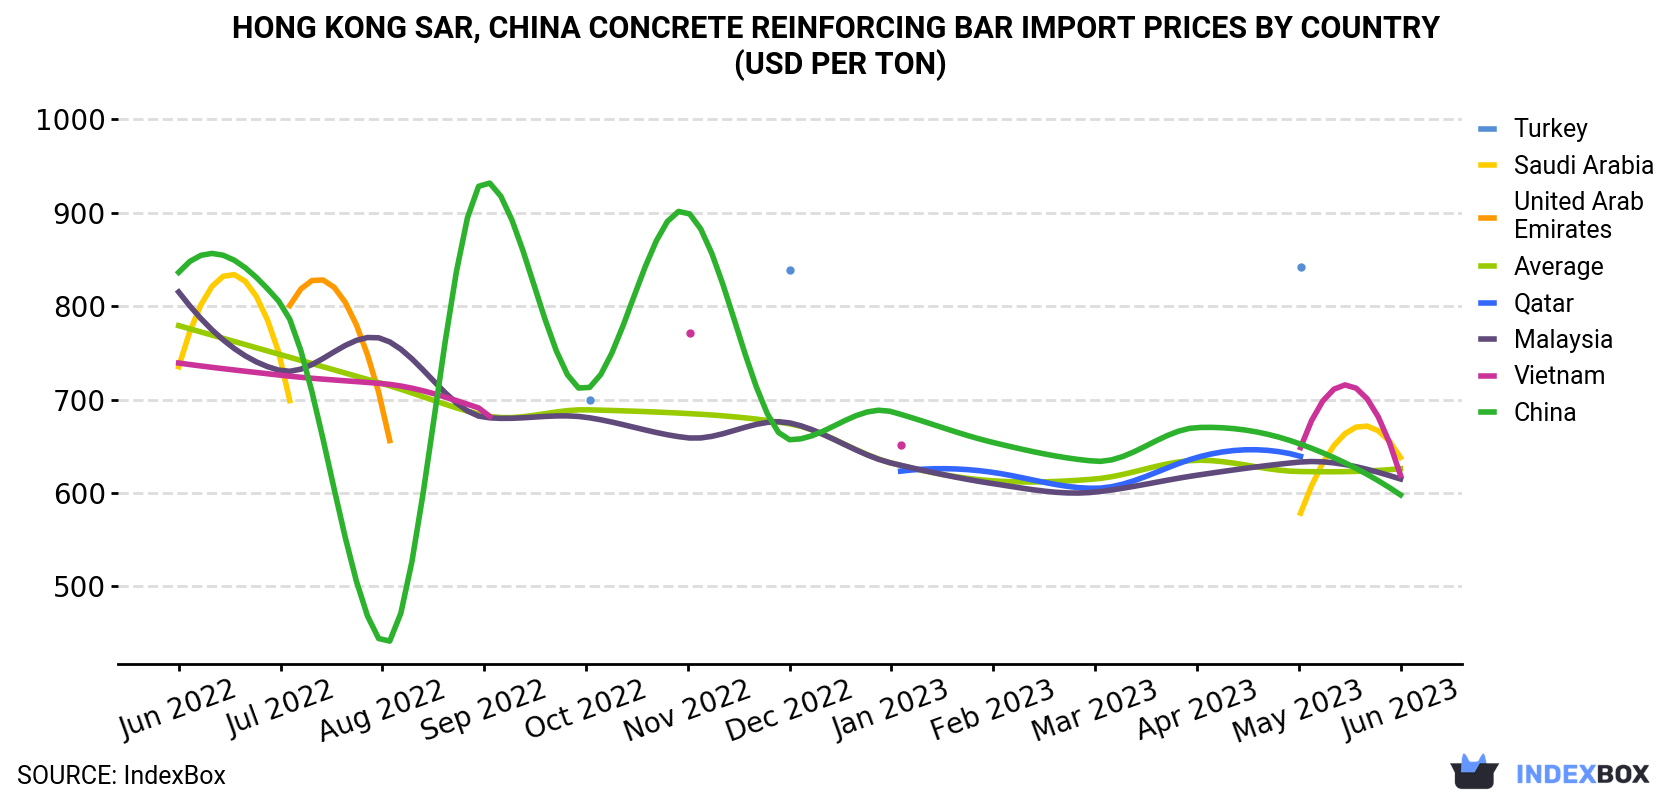 Hong Kong Concrete Reinforcing Bar Import Prices By Country (USD Per Ton)